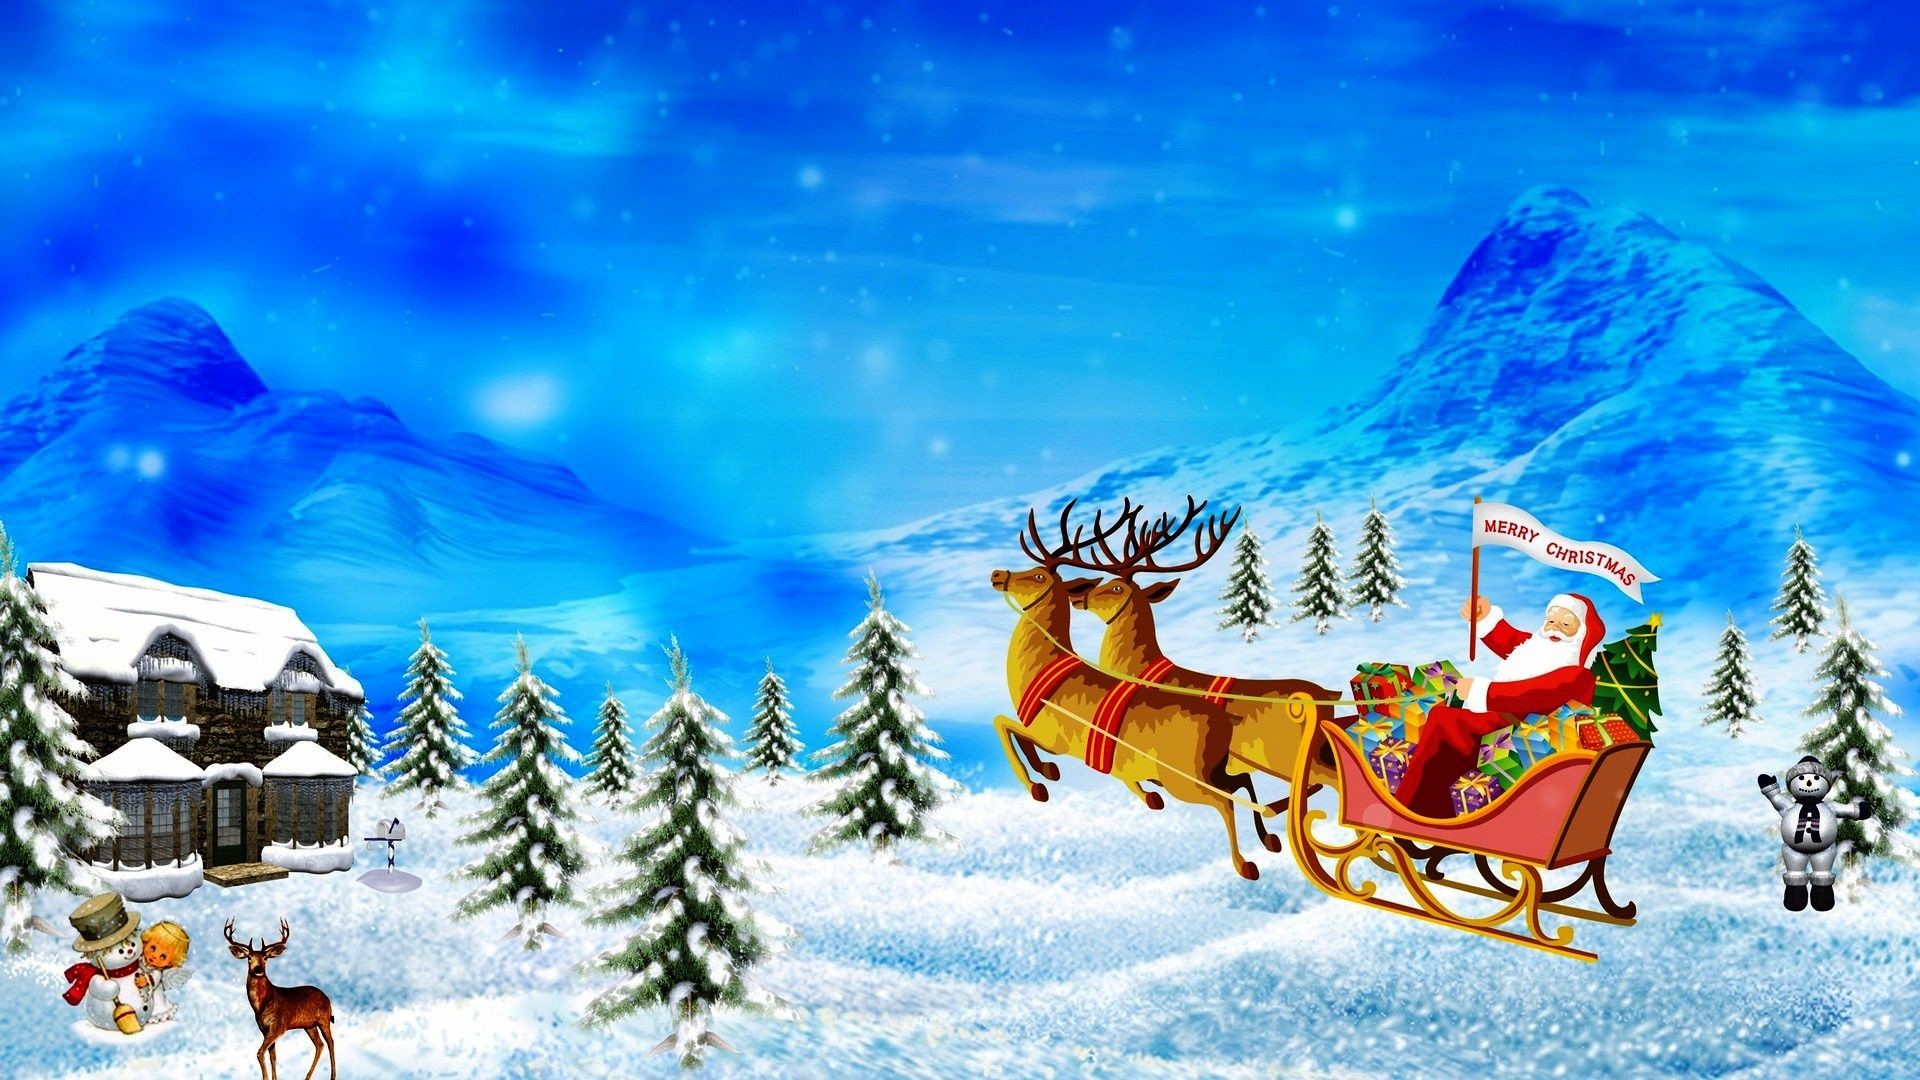 1920x1080 Best Colorful Christmas Wallpapers (11)